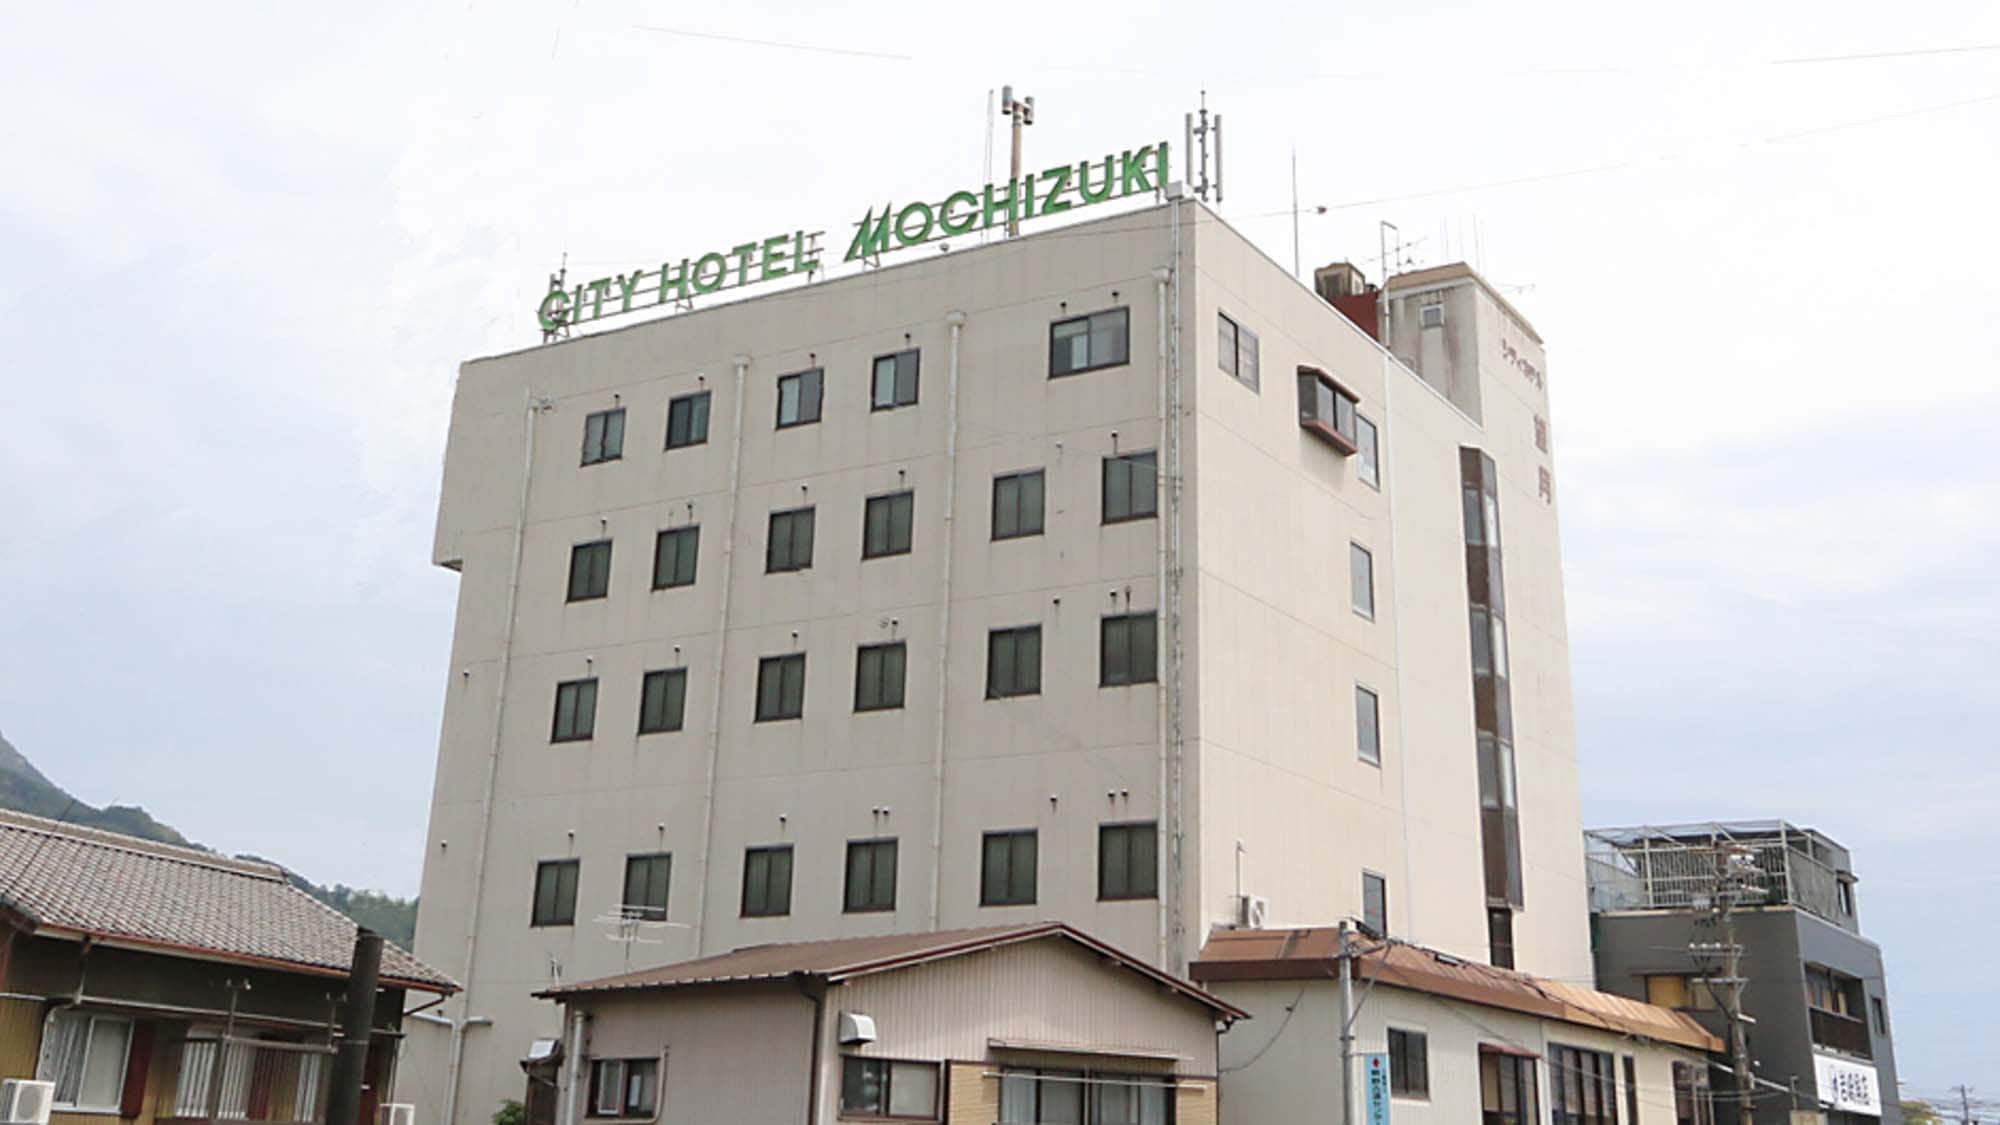 ・ It is a convenient city hotel about a 7-minute walk from JR Owase Station.